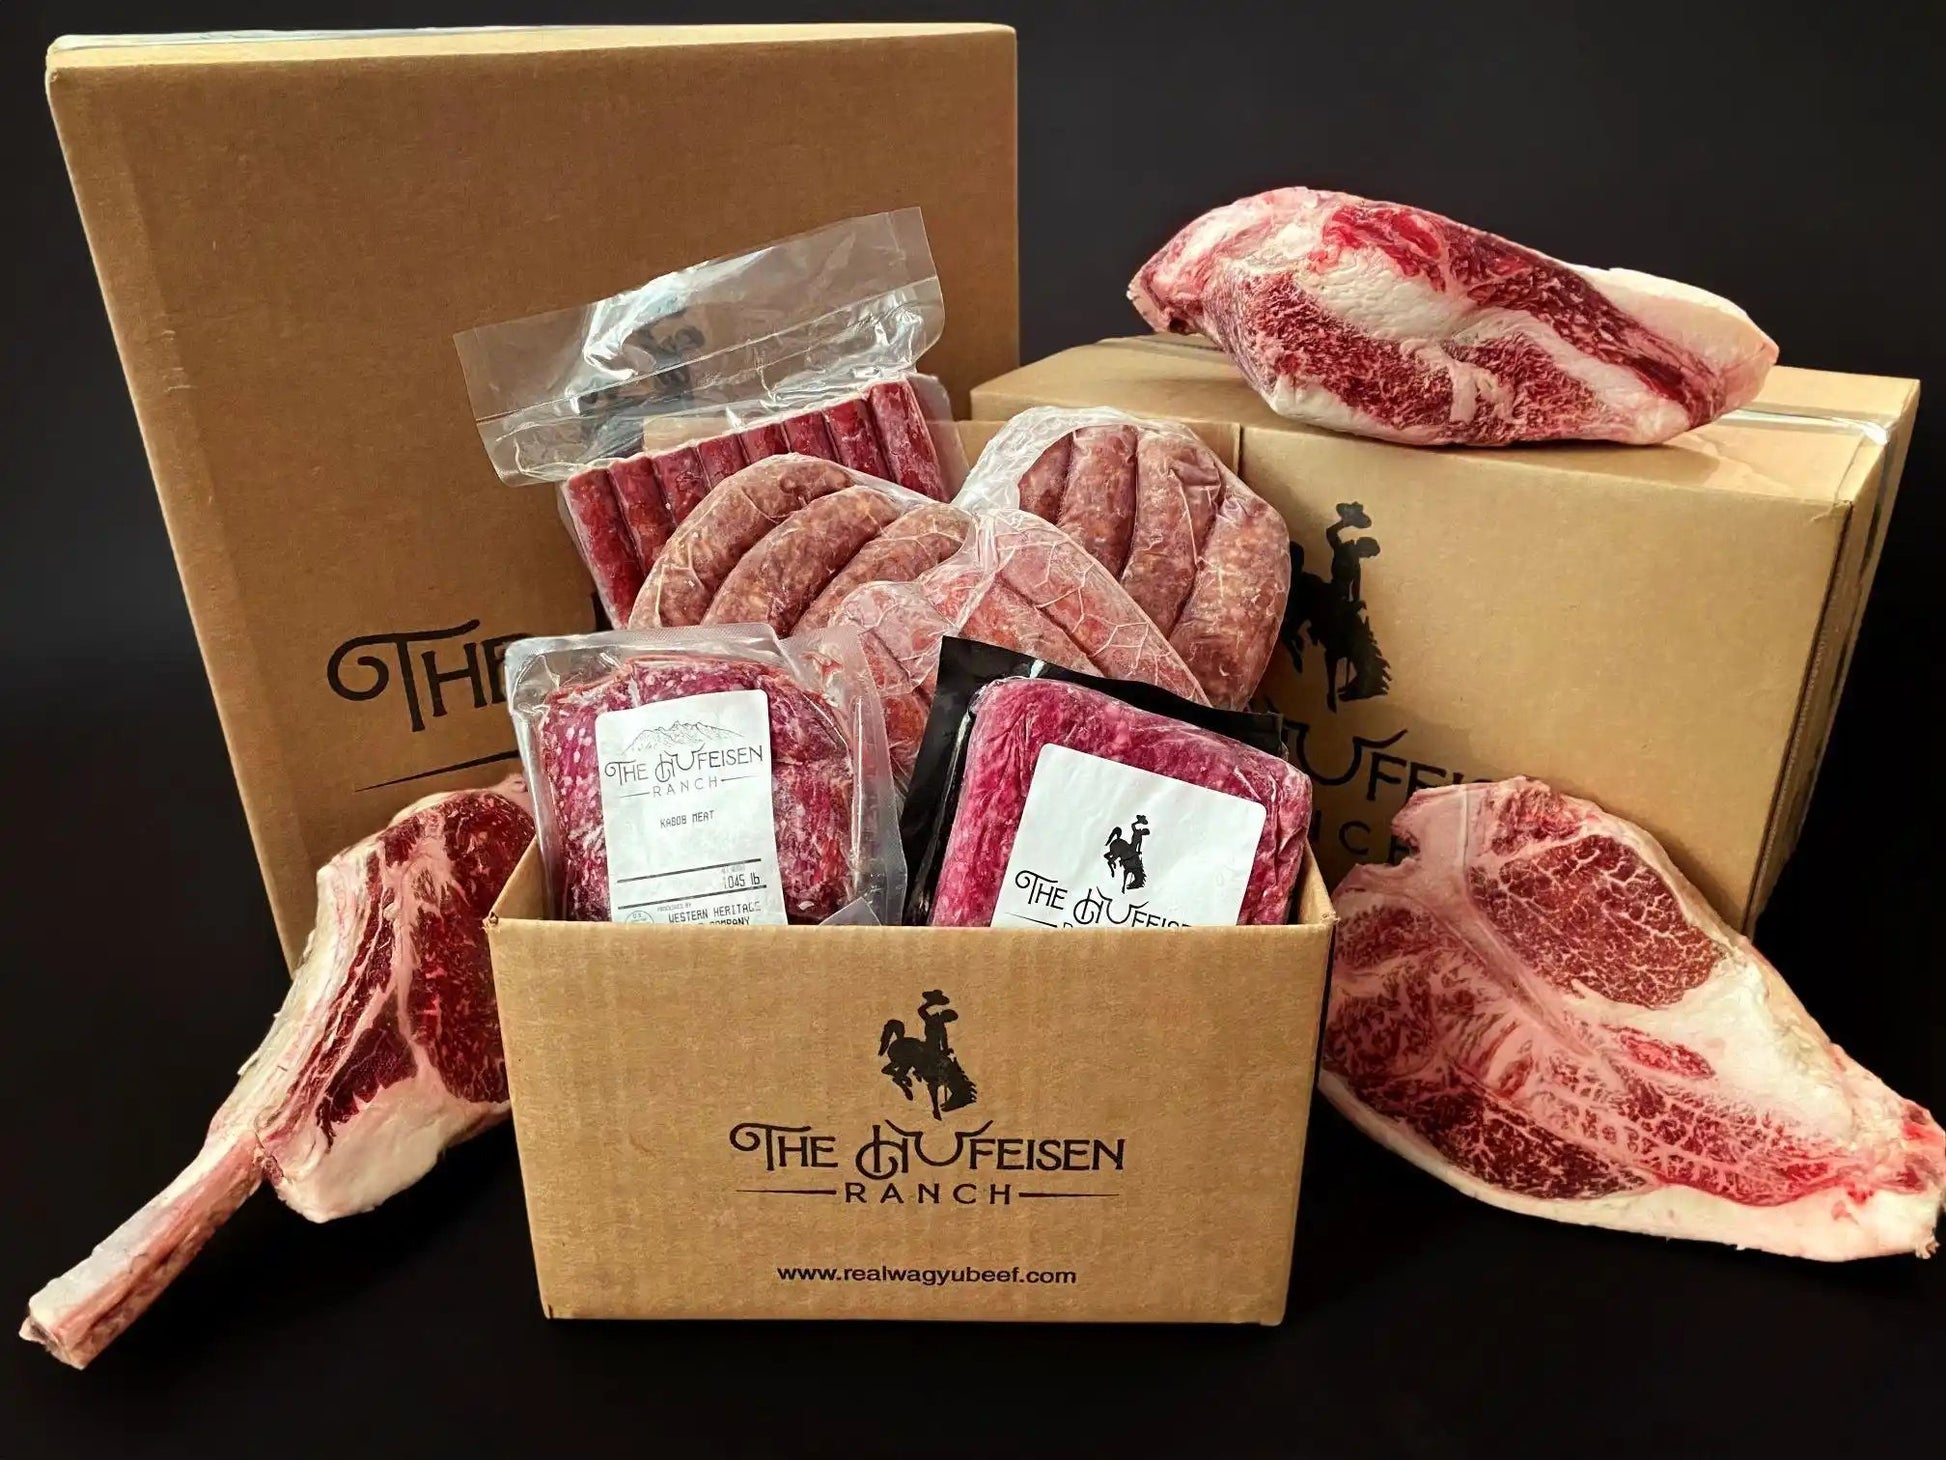 100% All-Natural Grass-Fed Pasture-Raised Wagyu Best of Beef Bundle - The Hufeisen-Ranch (WYO Wagyu)